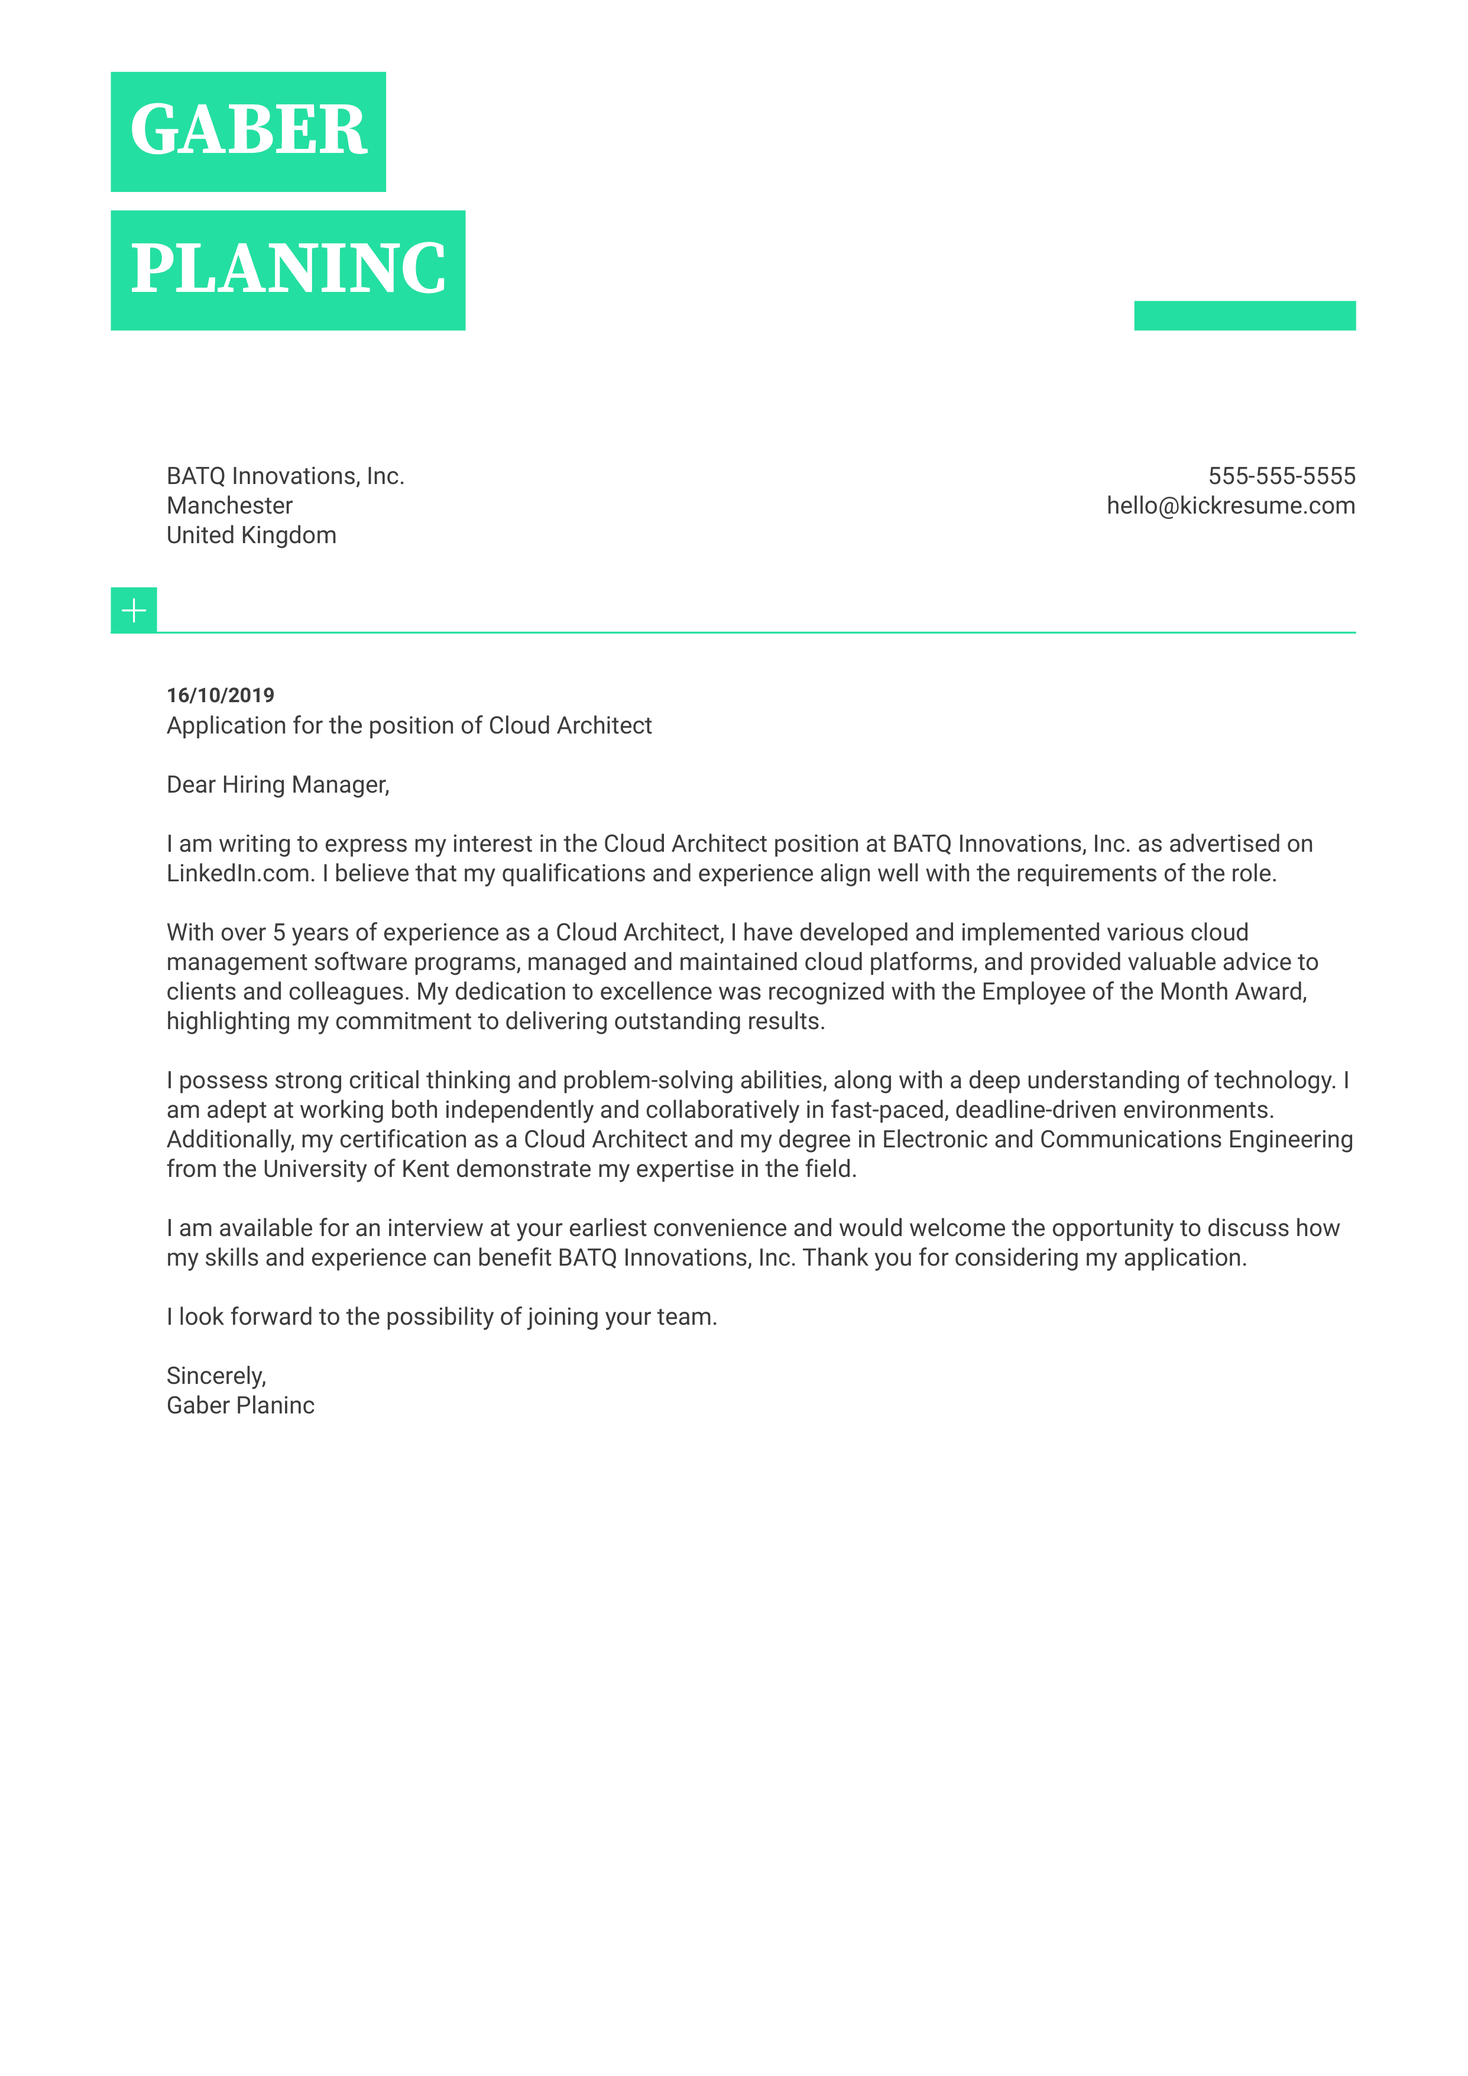 Research Intern Cover Letter Example